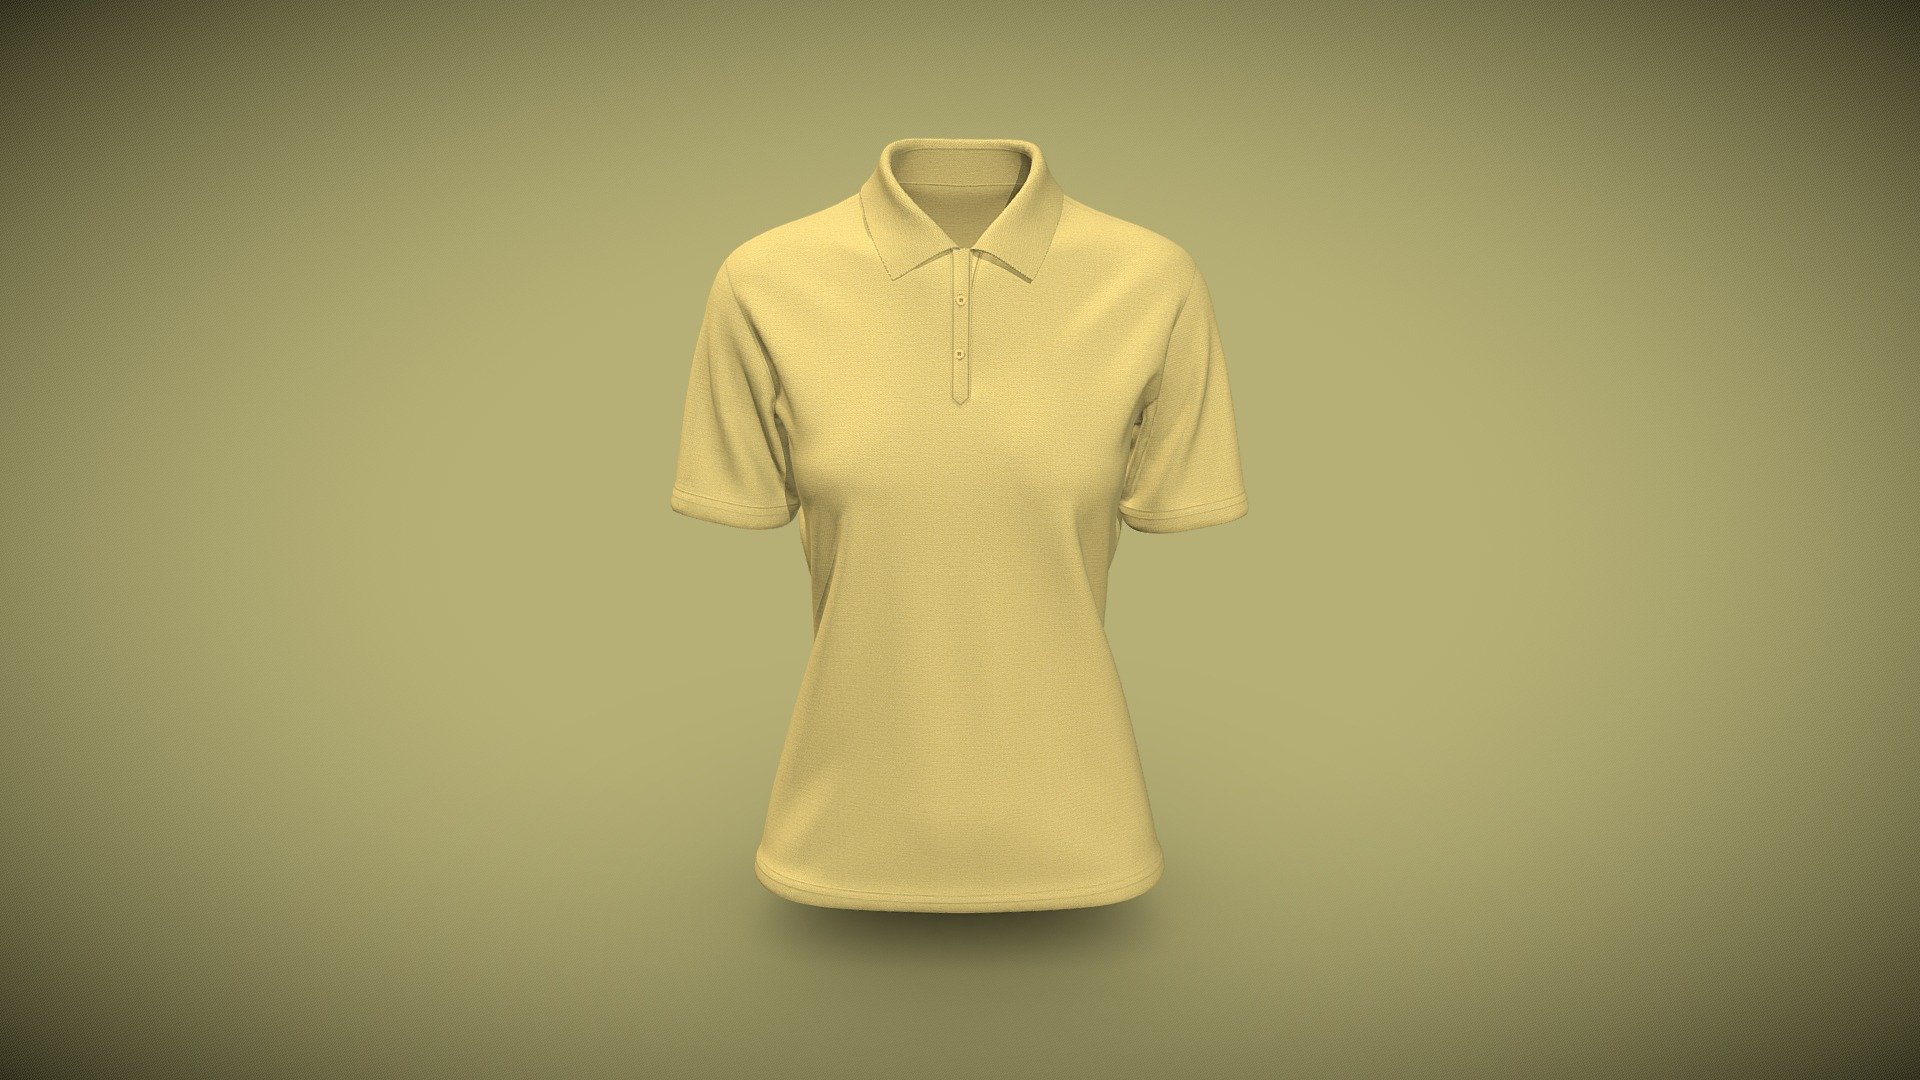 Cloth Title = Sustanable Ocean Split Neck Polo 

SKU = DG100144 

Category = Women 

Product Type = Polo 

Cloth Length = Regular 

Body Fit = Regular Fit 

Occasion = Casual 
 
Sleeve Style = Set In Sleeve 


Our Services:

3D Apparel Design.

OBJ,FBX,GLTF Making with High/Low Poly.

Fabric Digitalization.

Mockup making.

3D Teck Pack.

Pattern Making.

2D Illustration.

Cloth Animation and 360 Spin Video.


Contact us:- 

Email: info@digitalfashionwear.com 

Website: https://digitalfashionwear.com 


We designed all the types of cloth specially focused on product visualization, e-commerce, fitting, and production. 

We will design: 

T-shirts 

Polo shirts 

Hoodies 

Sweatshirt 

Jackets 

Shirts 

TankTops 

Trousers 

Bras 

Underwear 

Blazer 

Aprons 

Leggings 

and All Fashion items. 





Our goal is to make sure what we provide you, meets your demand 3d model